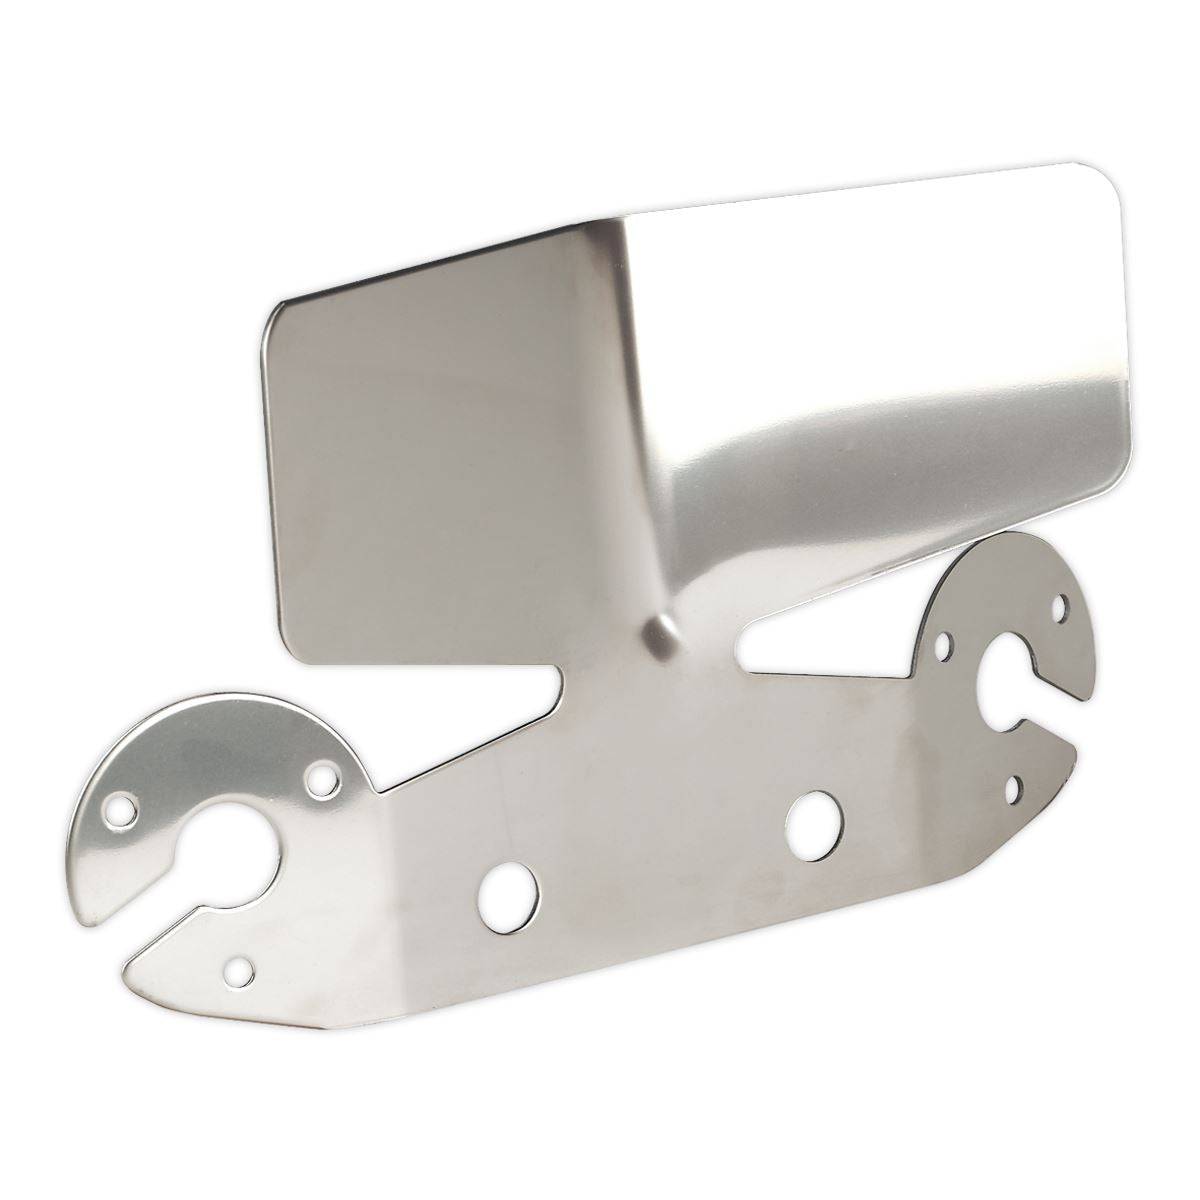 Sealey Socket & Bumper Protection Plate Stainless Steel